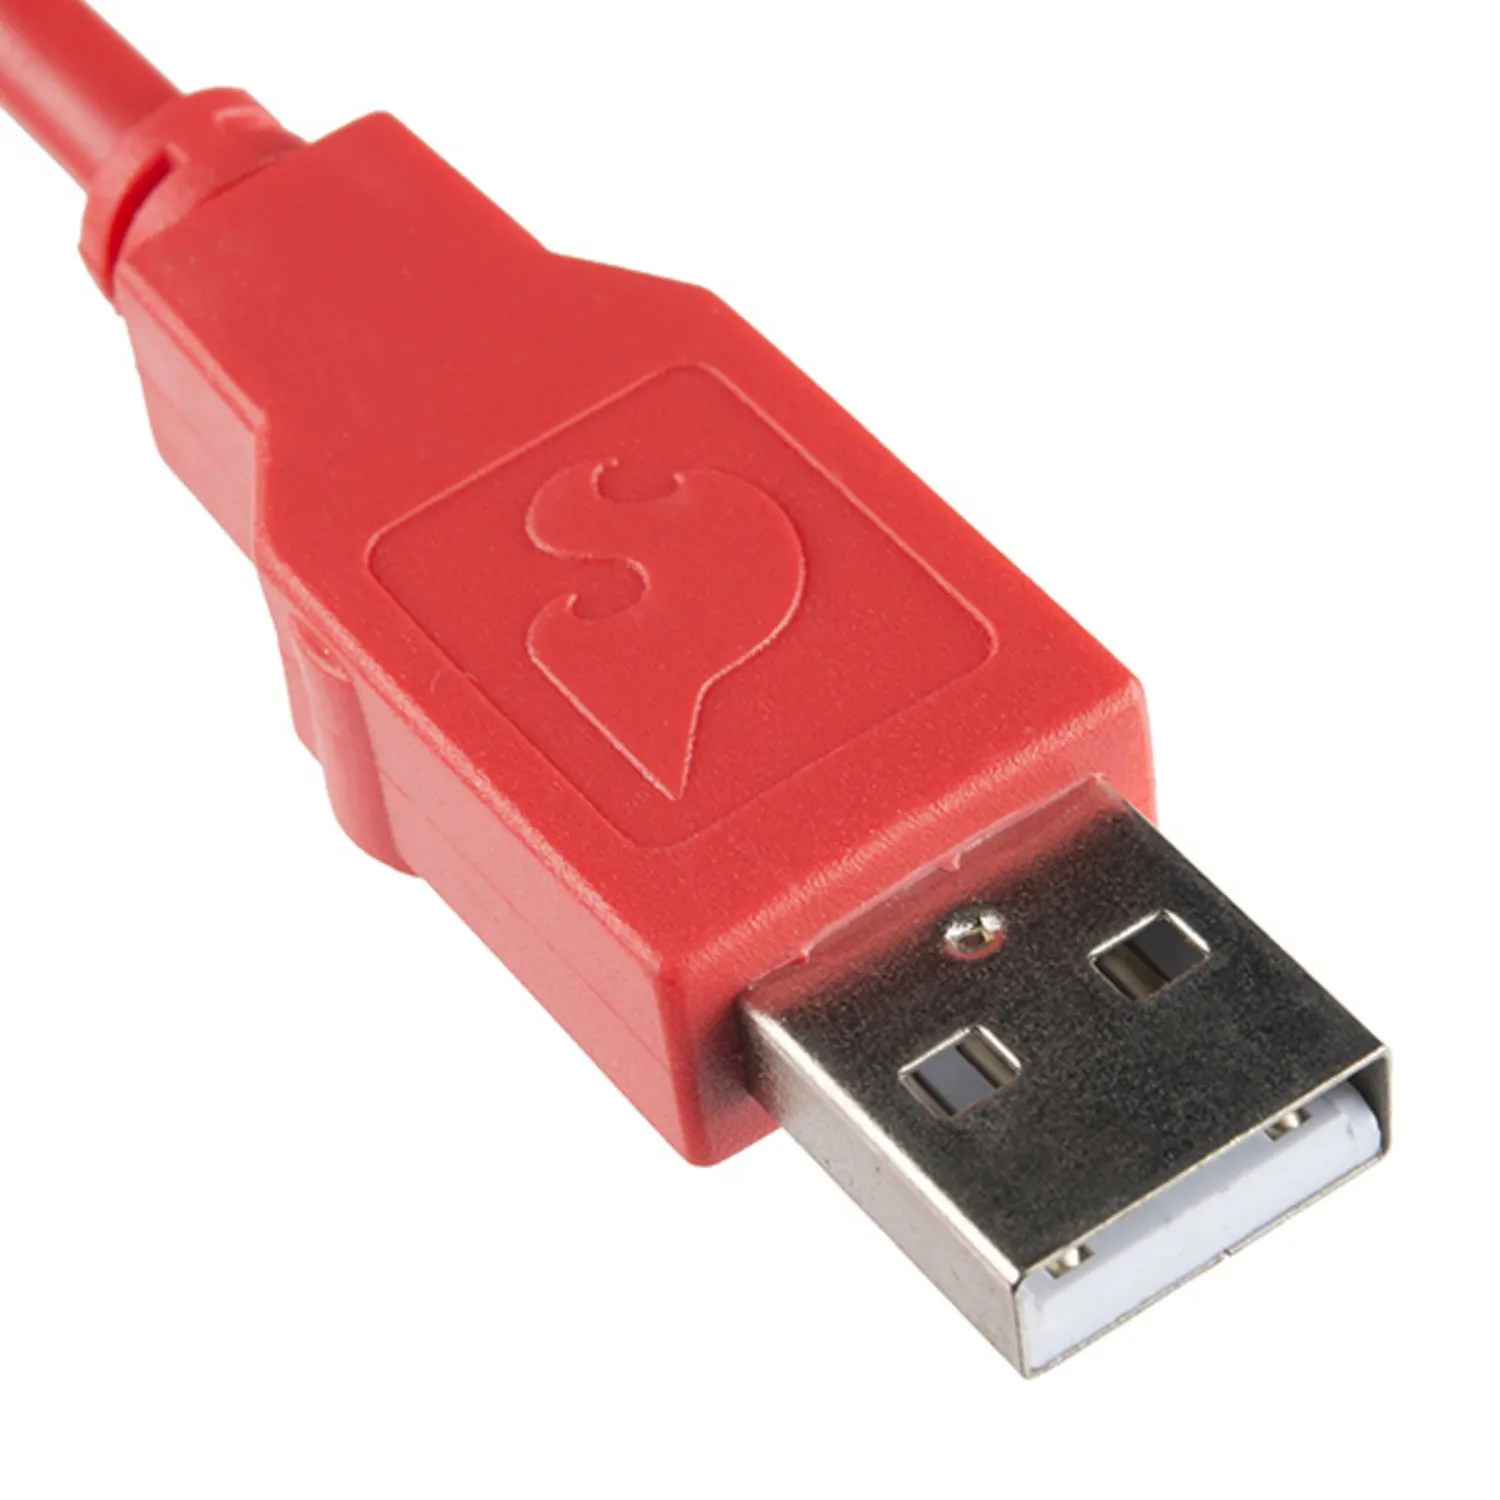 Photo of SparkFun Cerberus USB Cable - 6ft